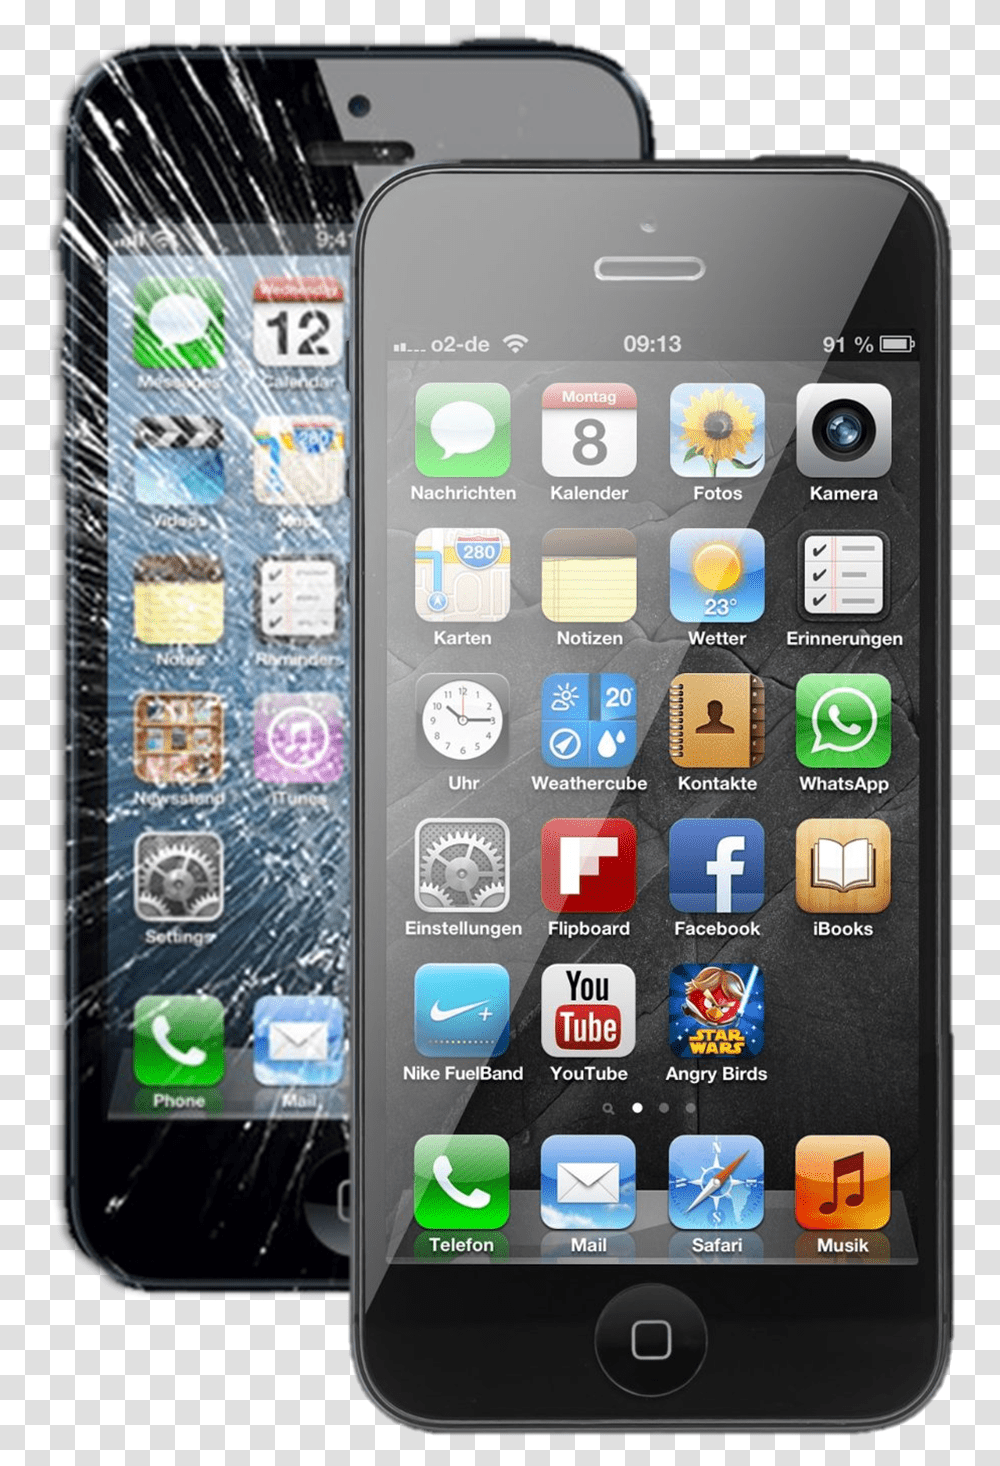 Screen Crack Iphone Broken & Fixed 1232523 Vippng Iphone 5 On Amazon, Mobile Phone, Electronics, Cell Phone Transparent Png